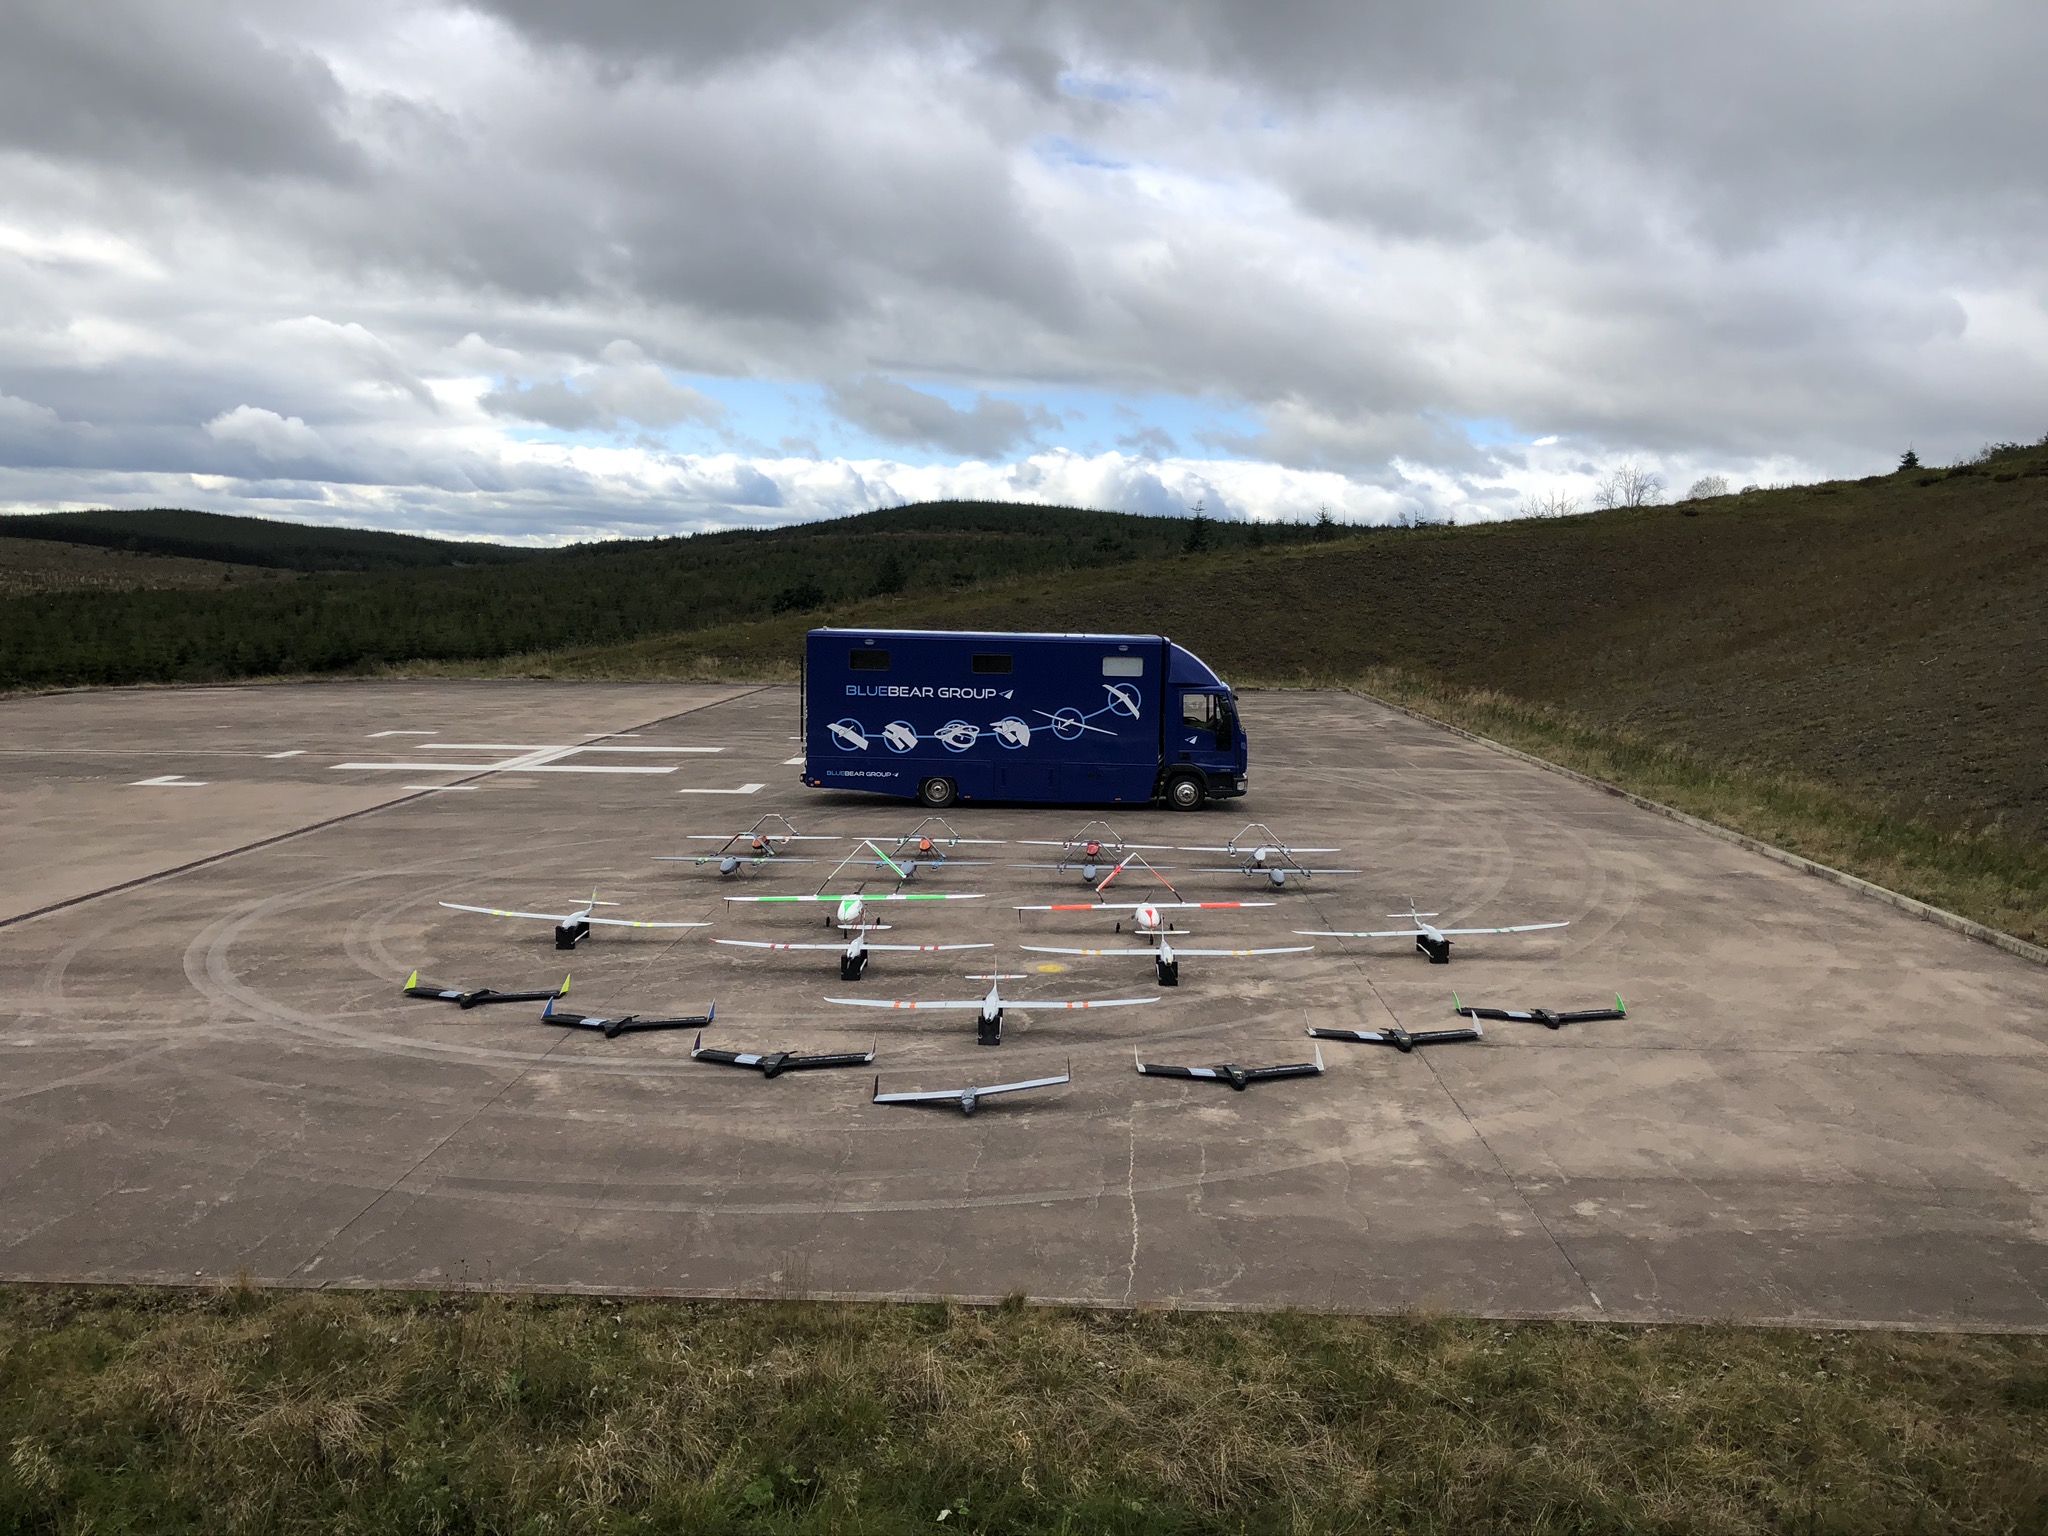 https://bbsr.co.uk/news/blue-bear-demonstrates-a-collaborative-20-drone-swarm-undertaking-bvlos-operations